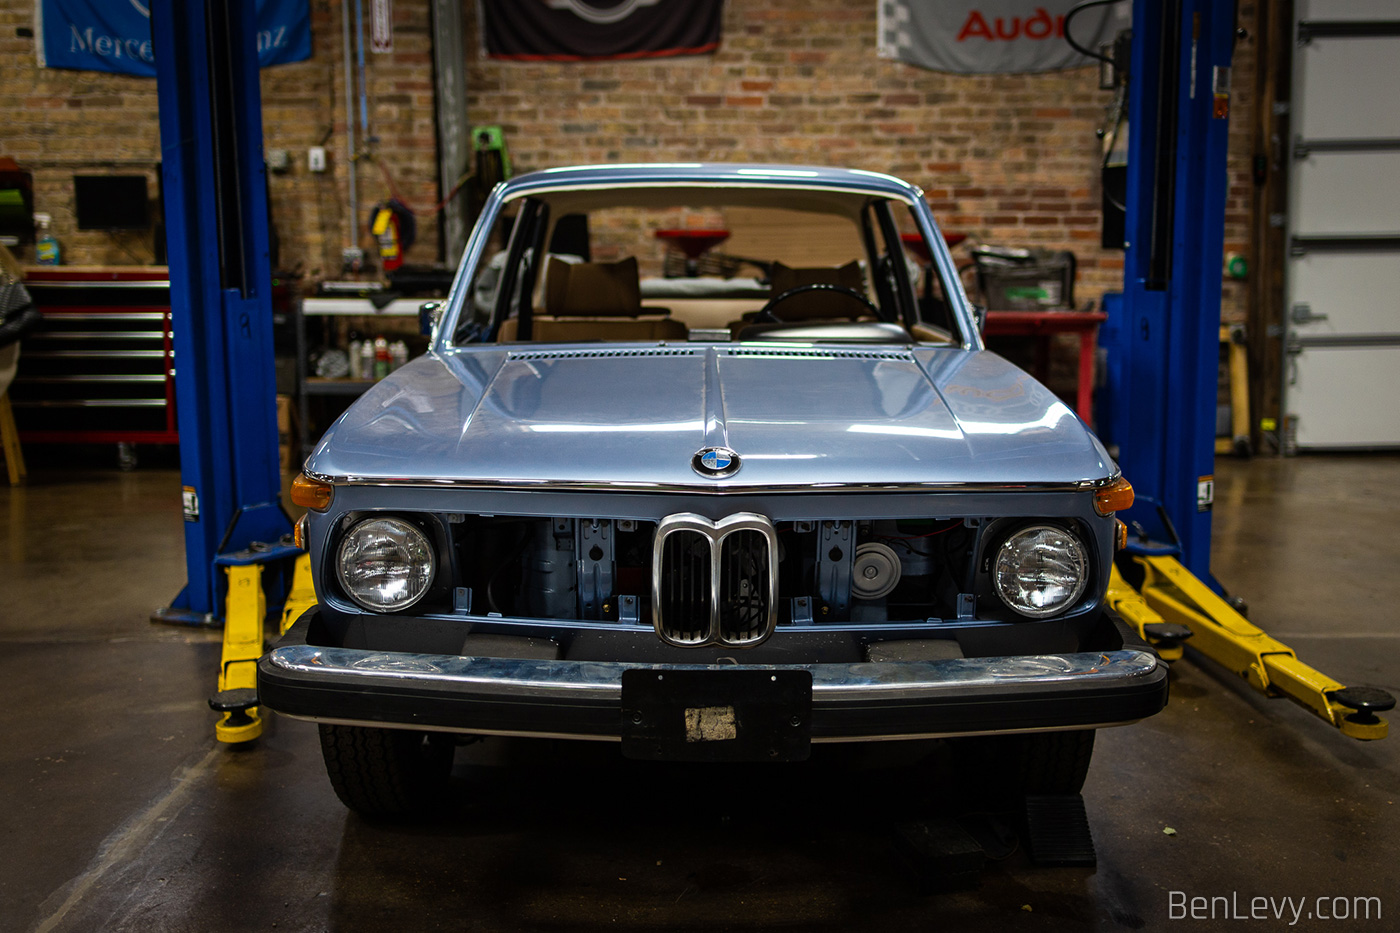 Blue BMW 2002 being restored at Midwest Performance Cars